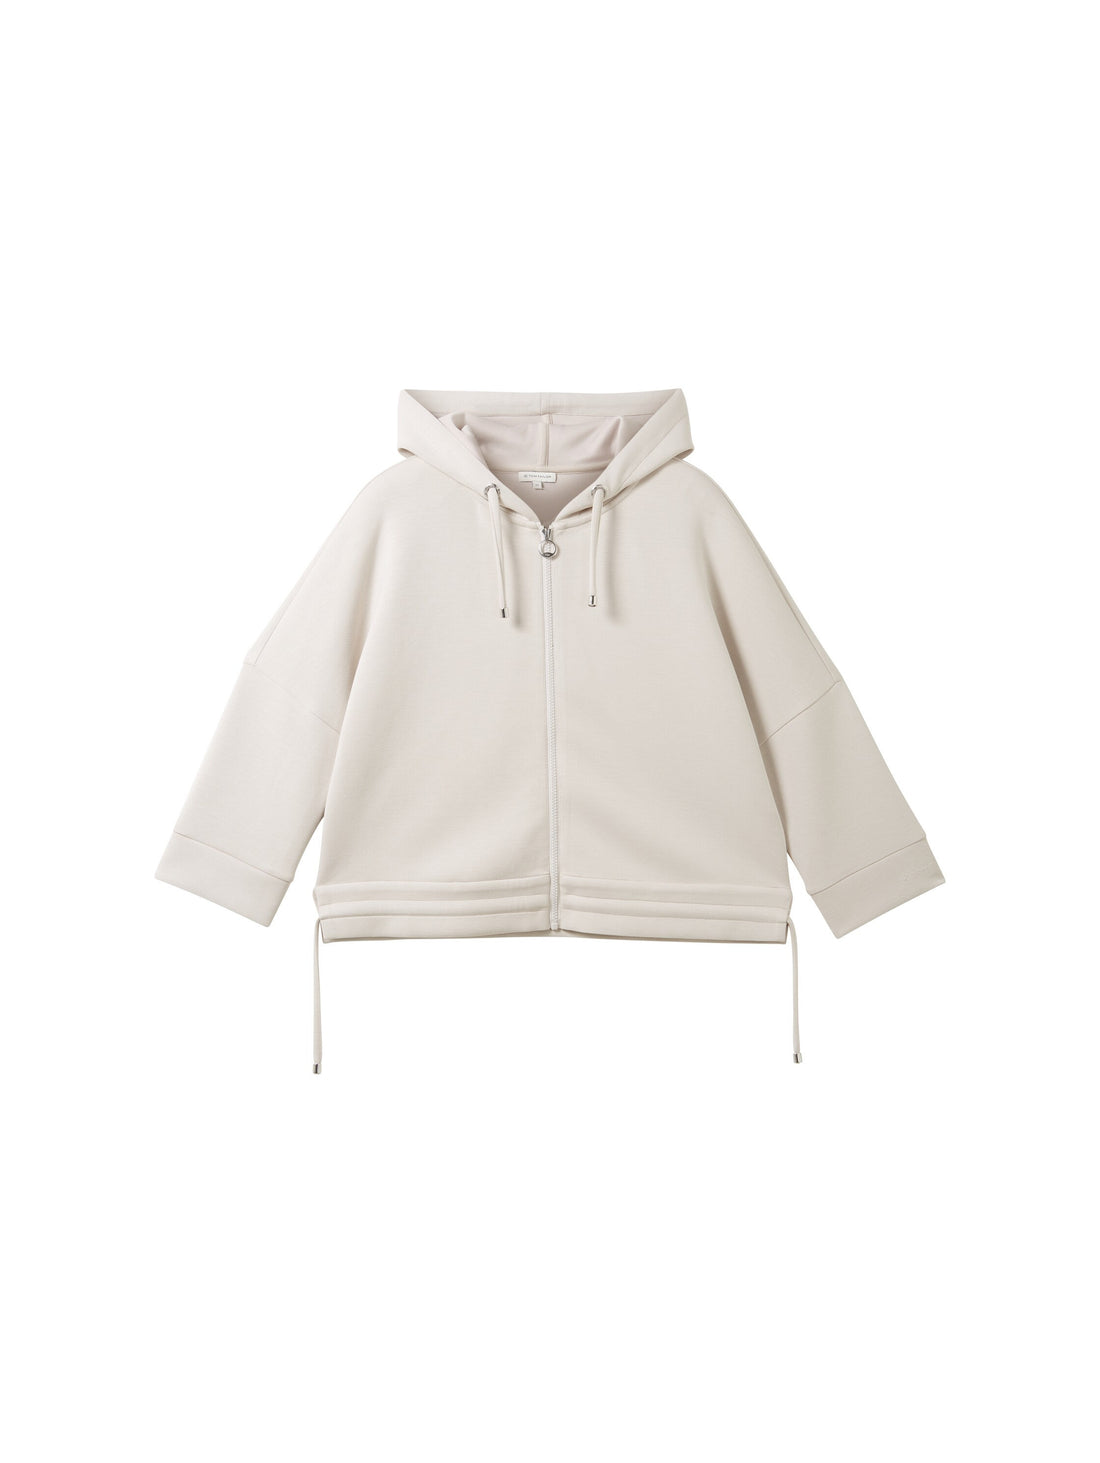 Hoodie With Adjustable Side Strap_1038182_16339_01